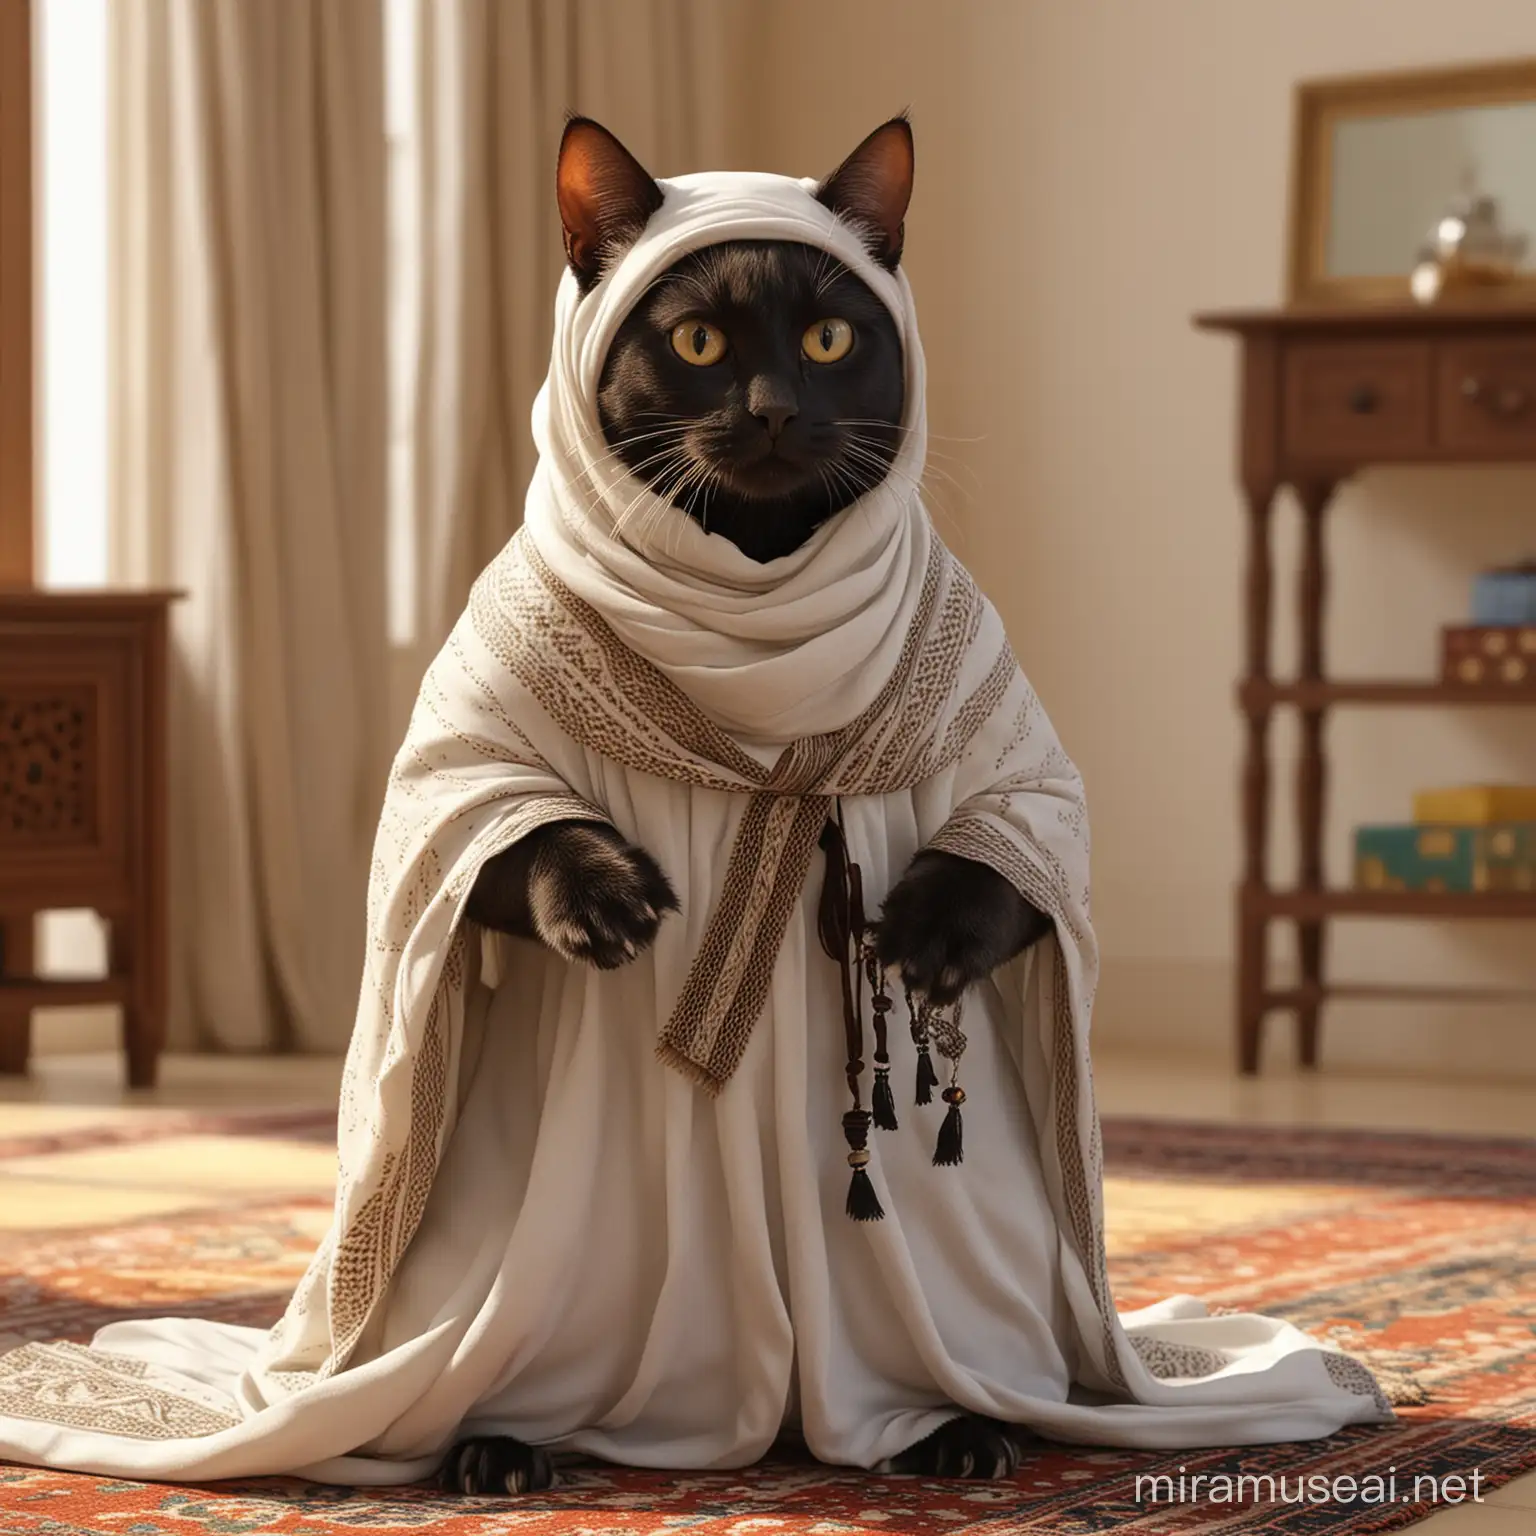 Jack Cat Character from Oggy and the Cockroaches in Traditional Arab Attire in a Detailed Arabian Setting